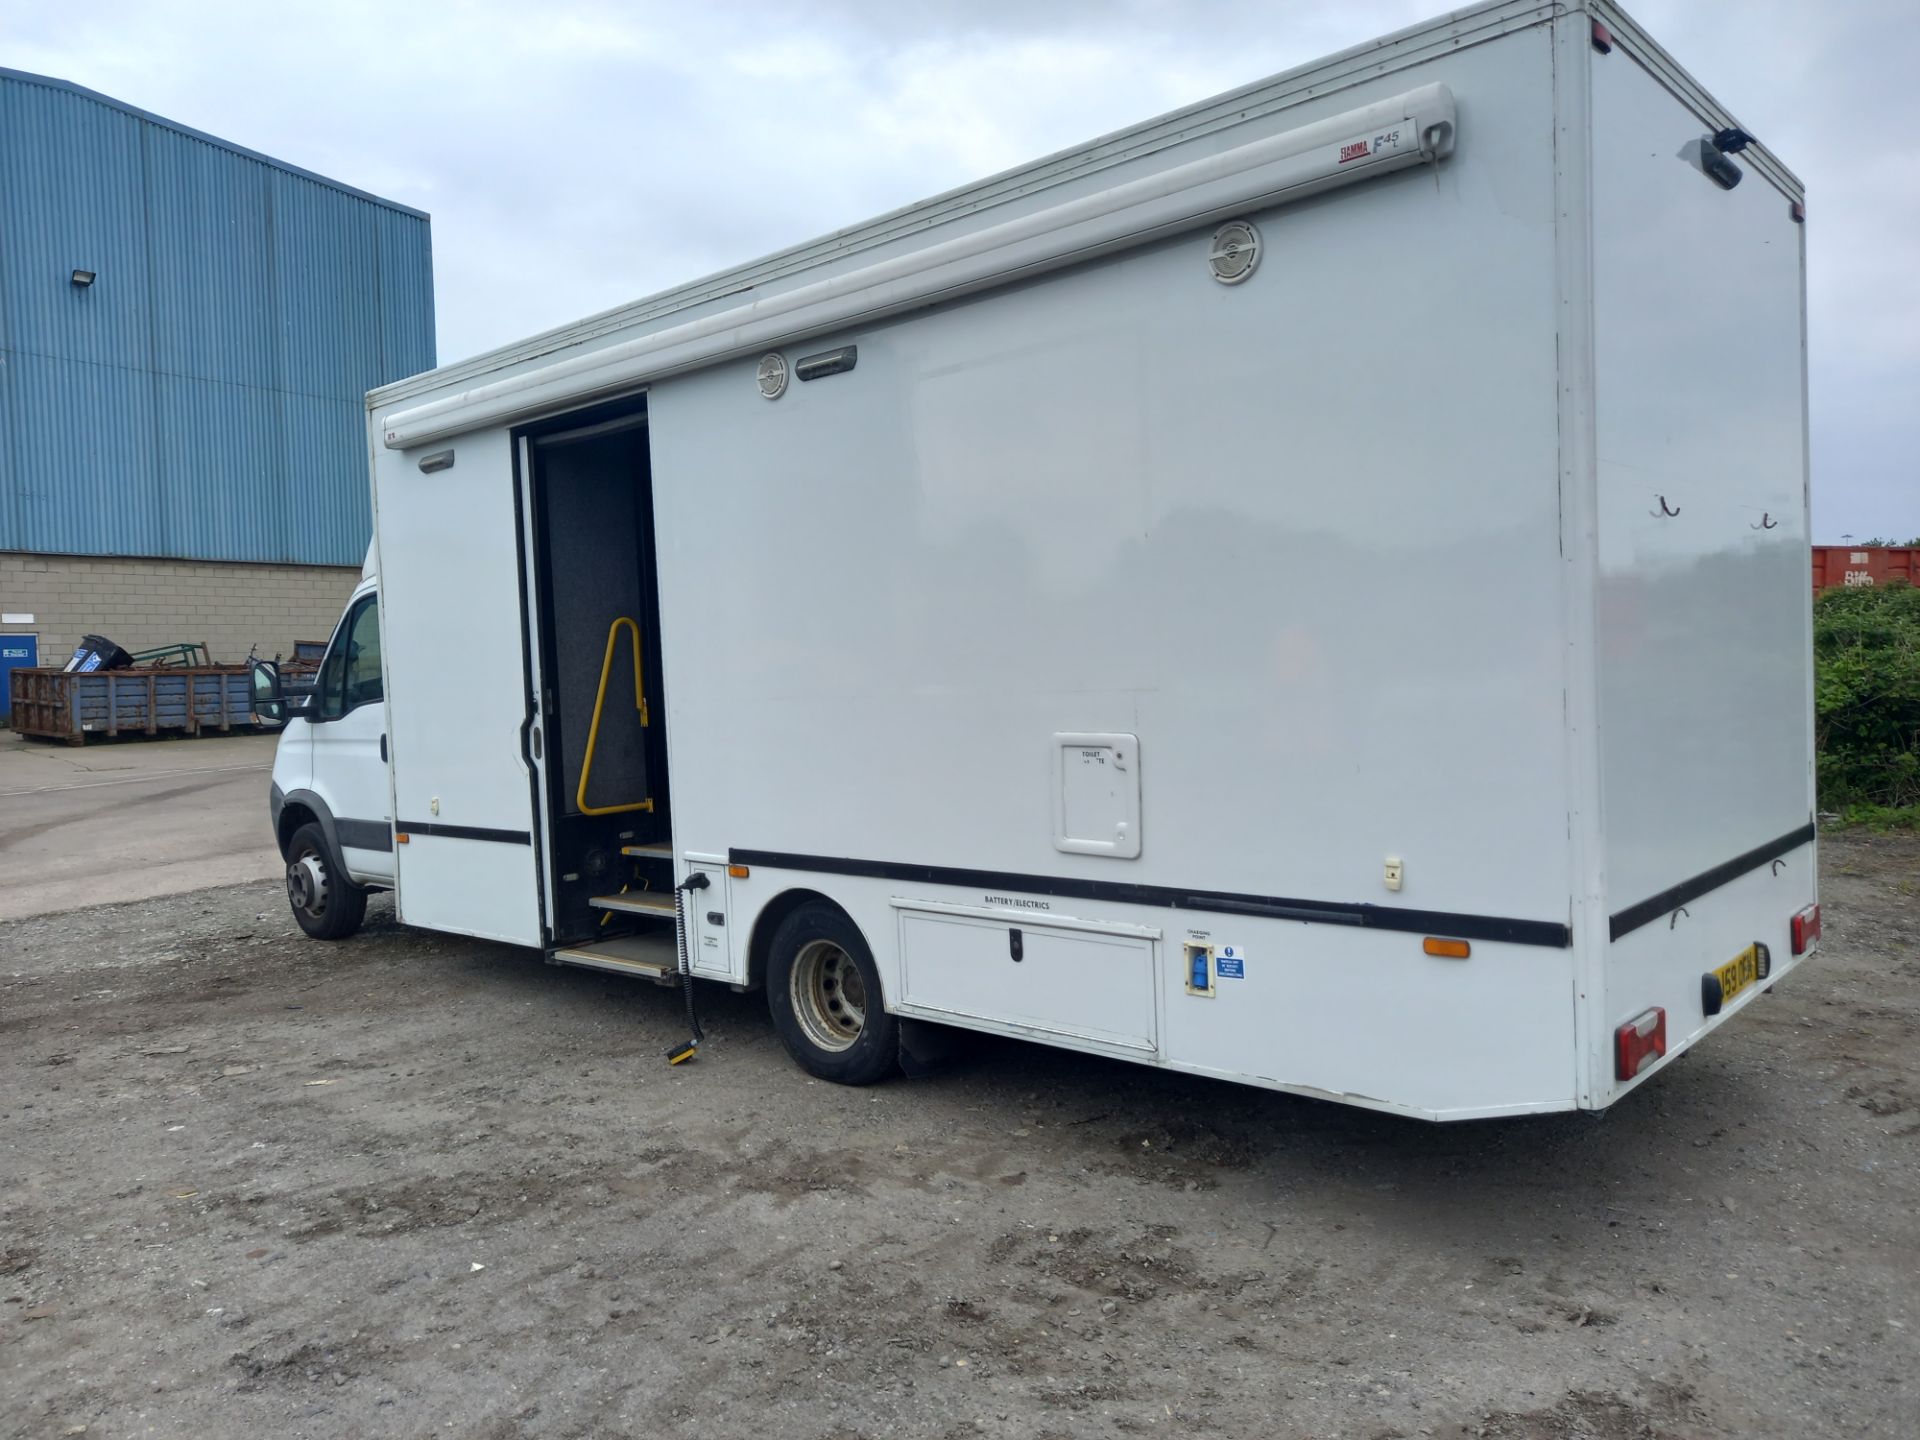 Community Outreach Vehicle/Camper Van Conversion. - Image 6 of 19